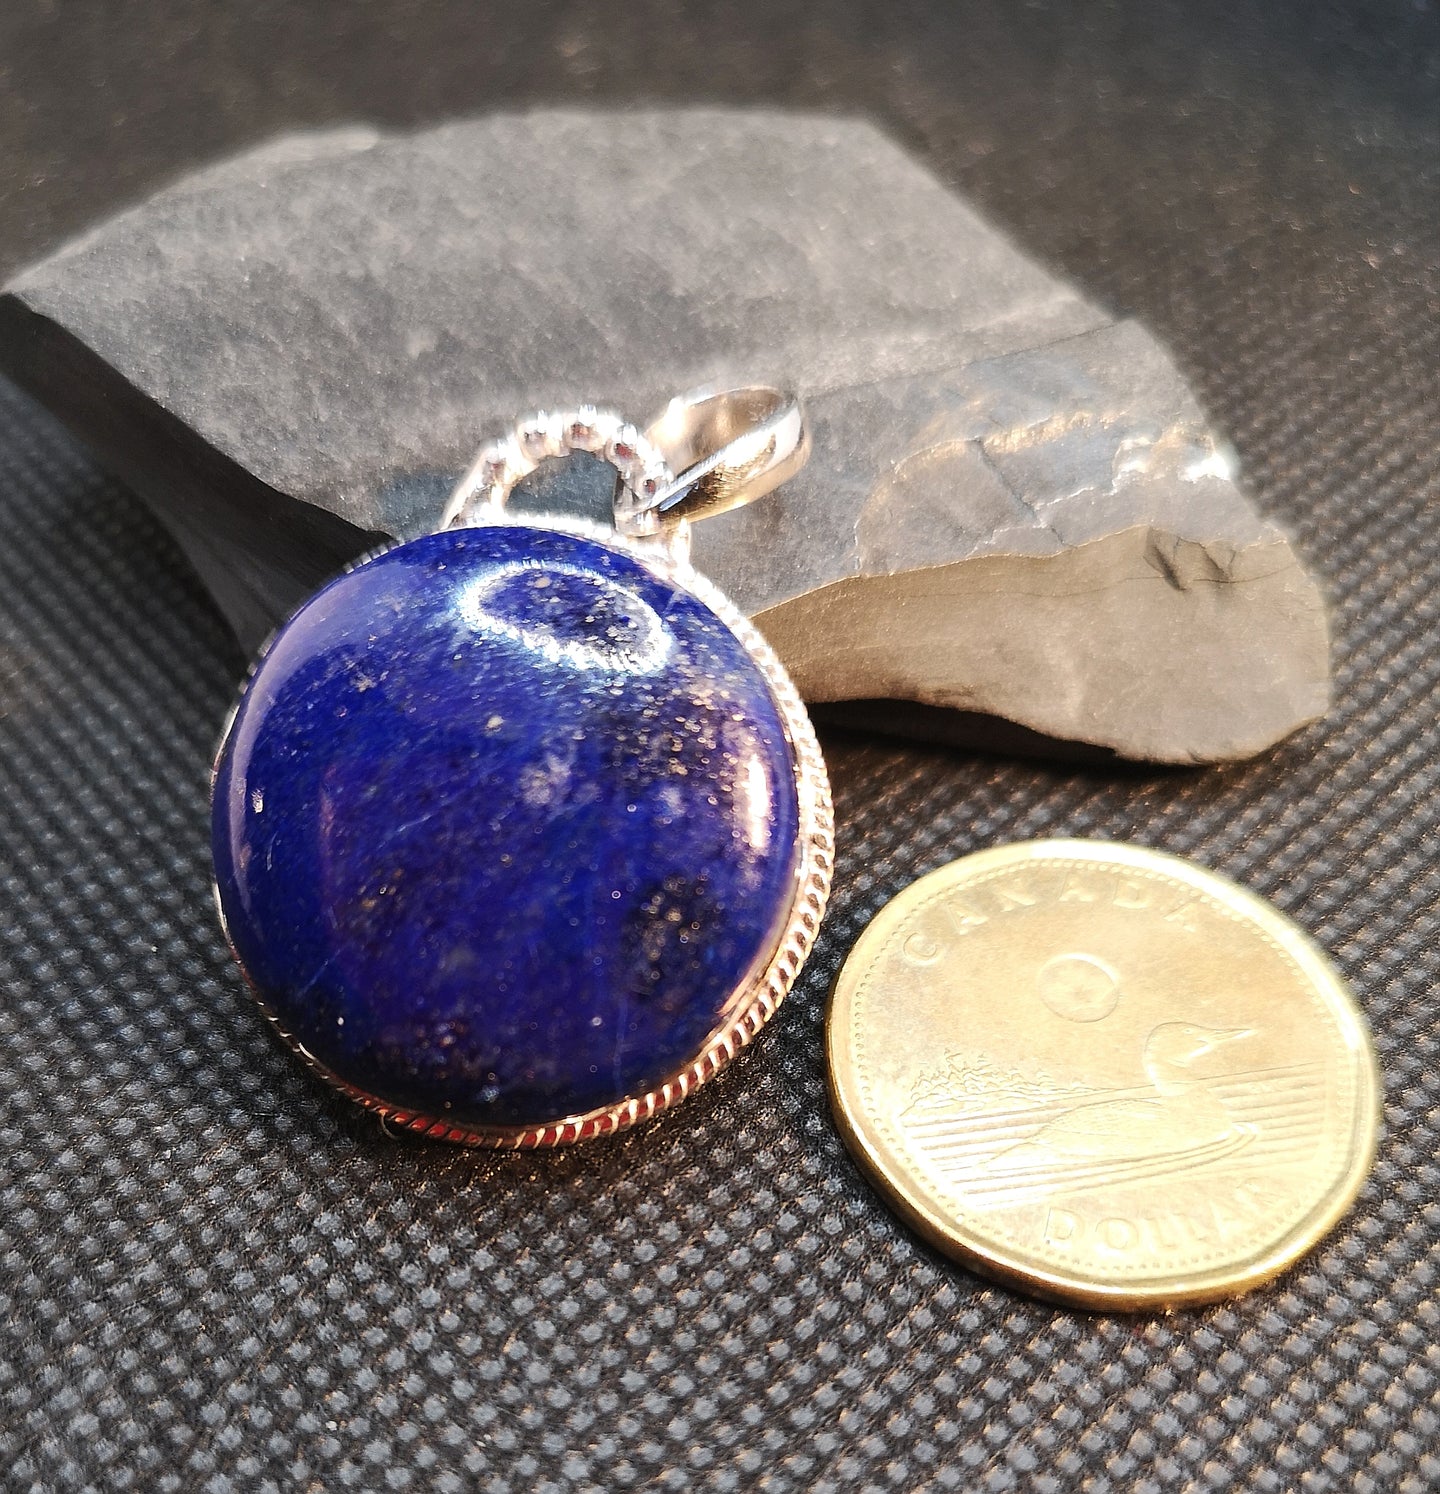 Large top quality lapis lazuli pendant set in silver with rhodium finish